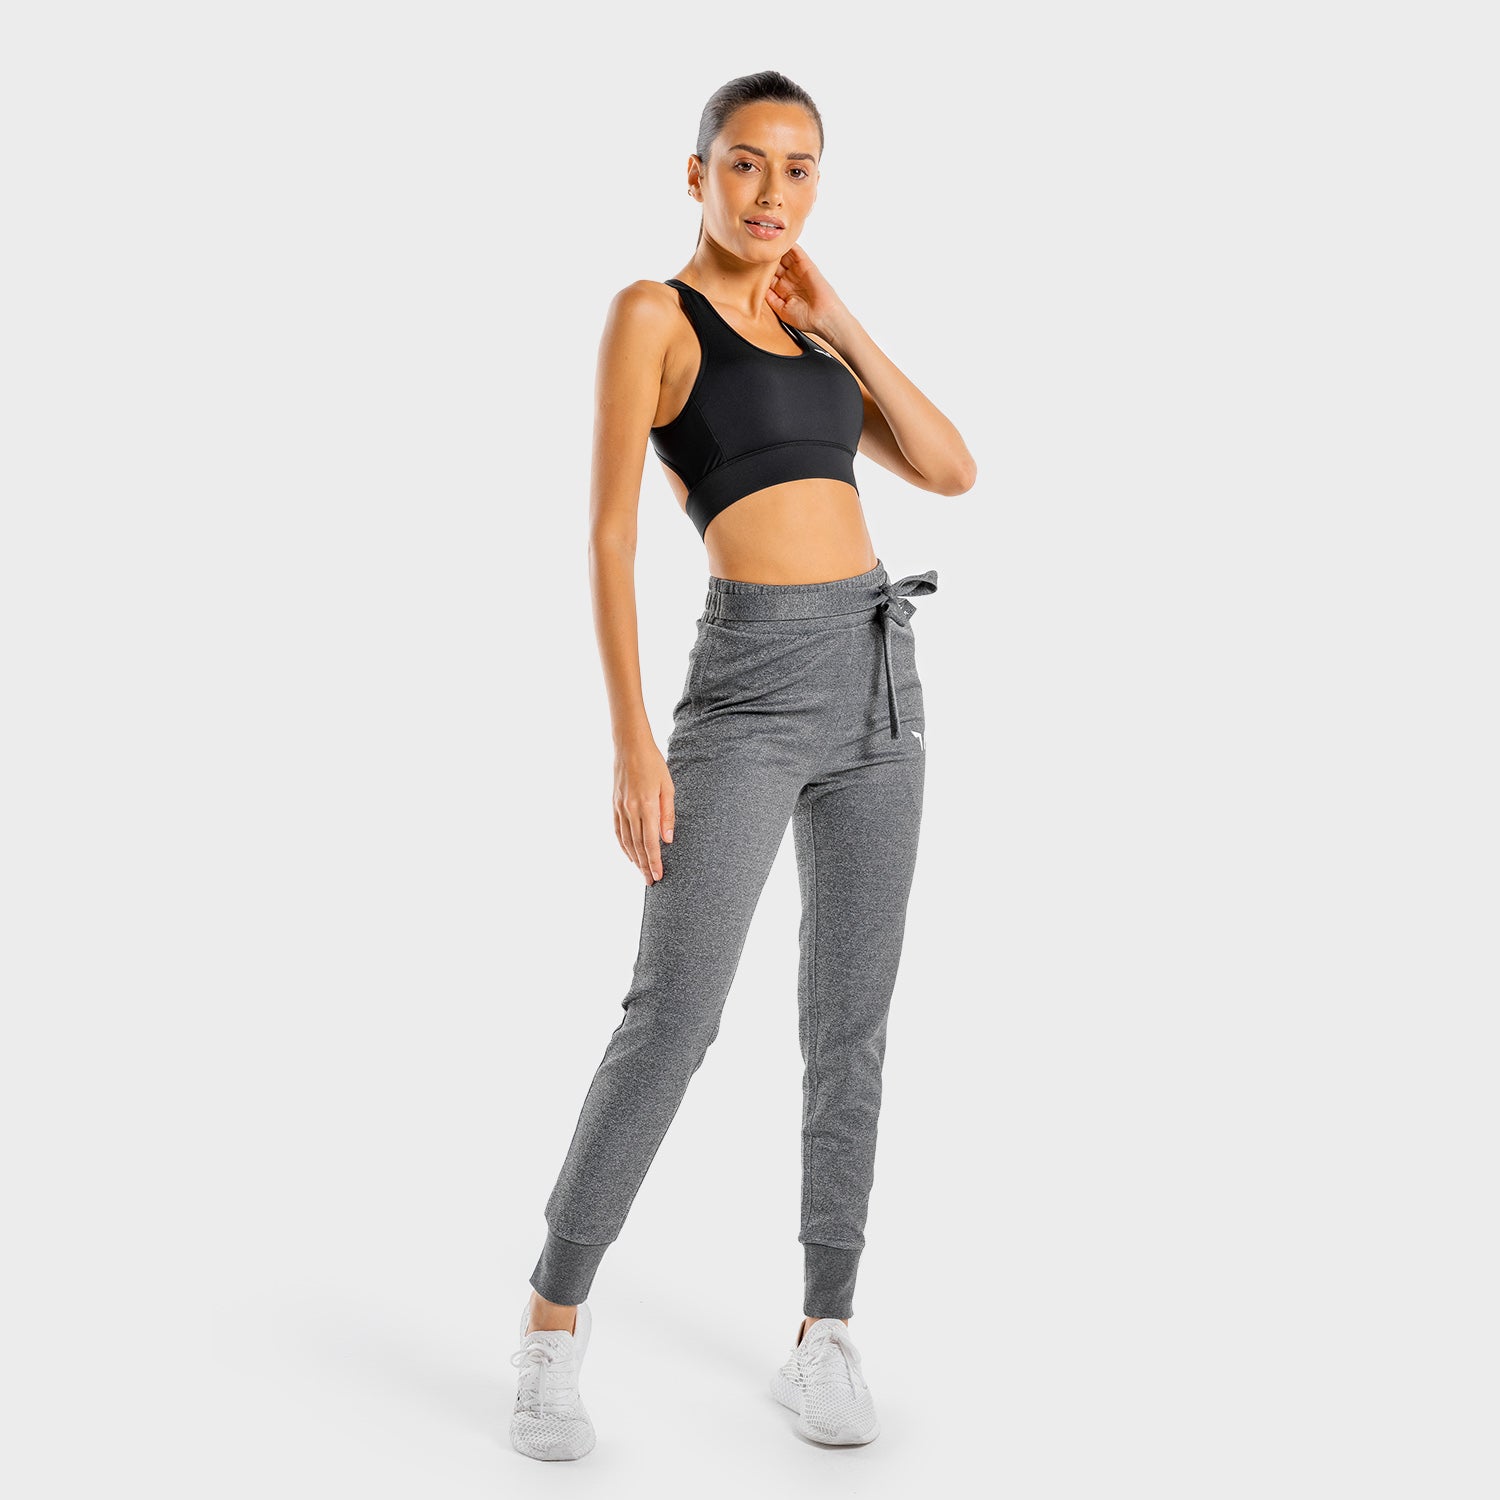 She-Wolf Do-Knot-Joggers - Teal | Workout Pants Women | SQUATWOLF